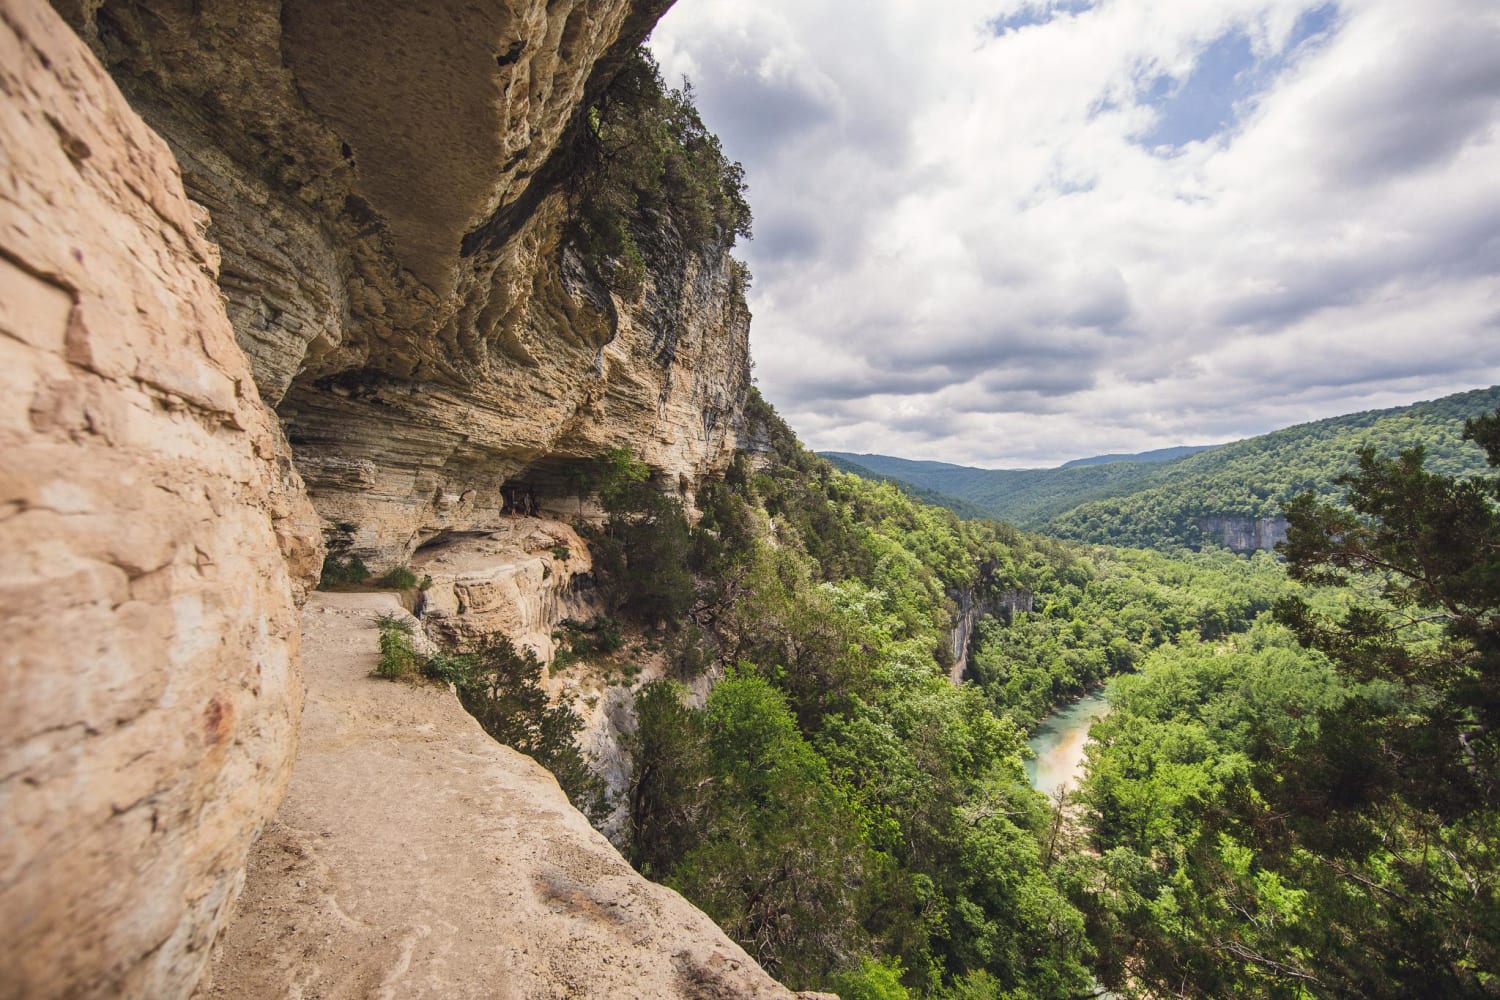 Another angle of the Goat Bluff Trail on the Buffalo River near Ponca, Ar